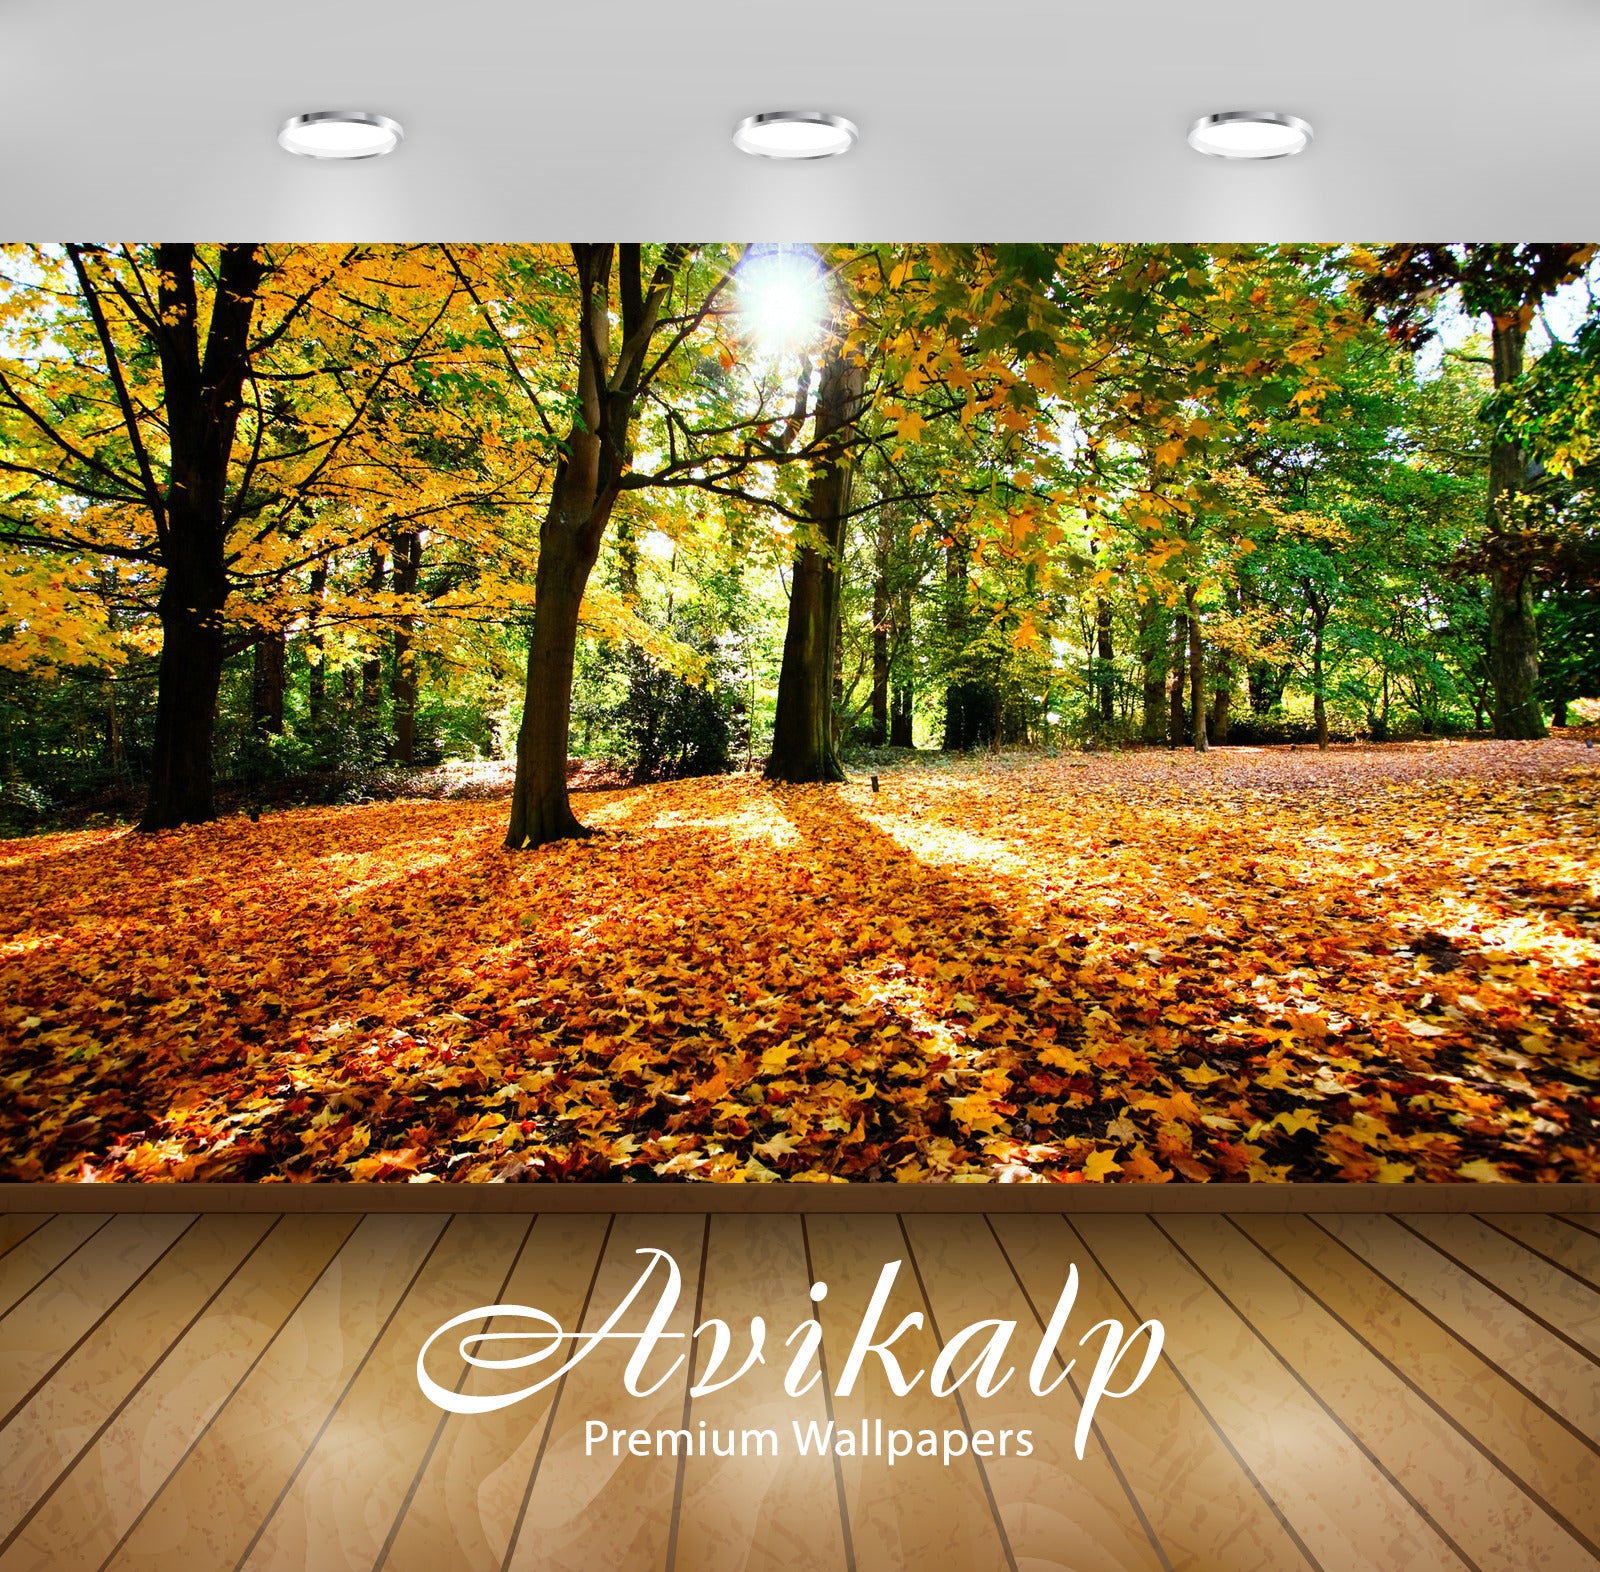 Avikalp Exclusive Awi5141 Autumn In The Forest Nature Full HD Wallpapers for Living room, Hall, Kids